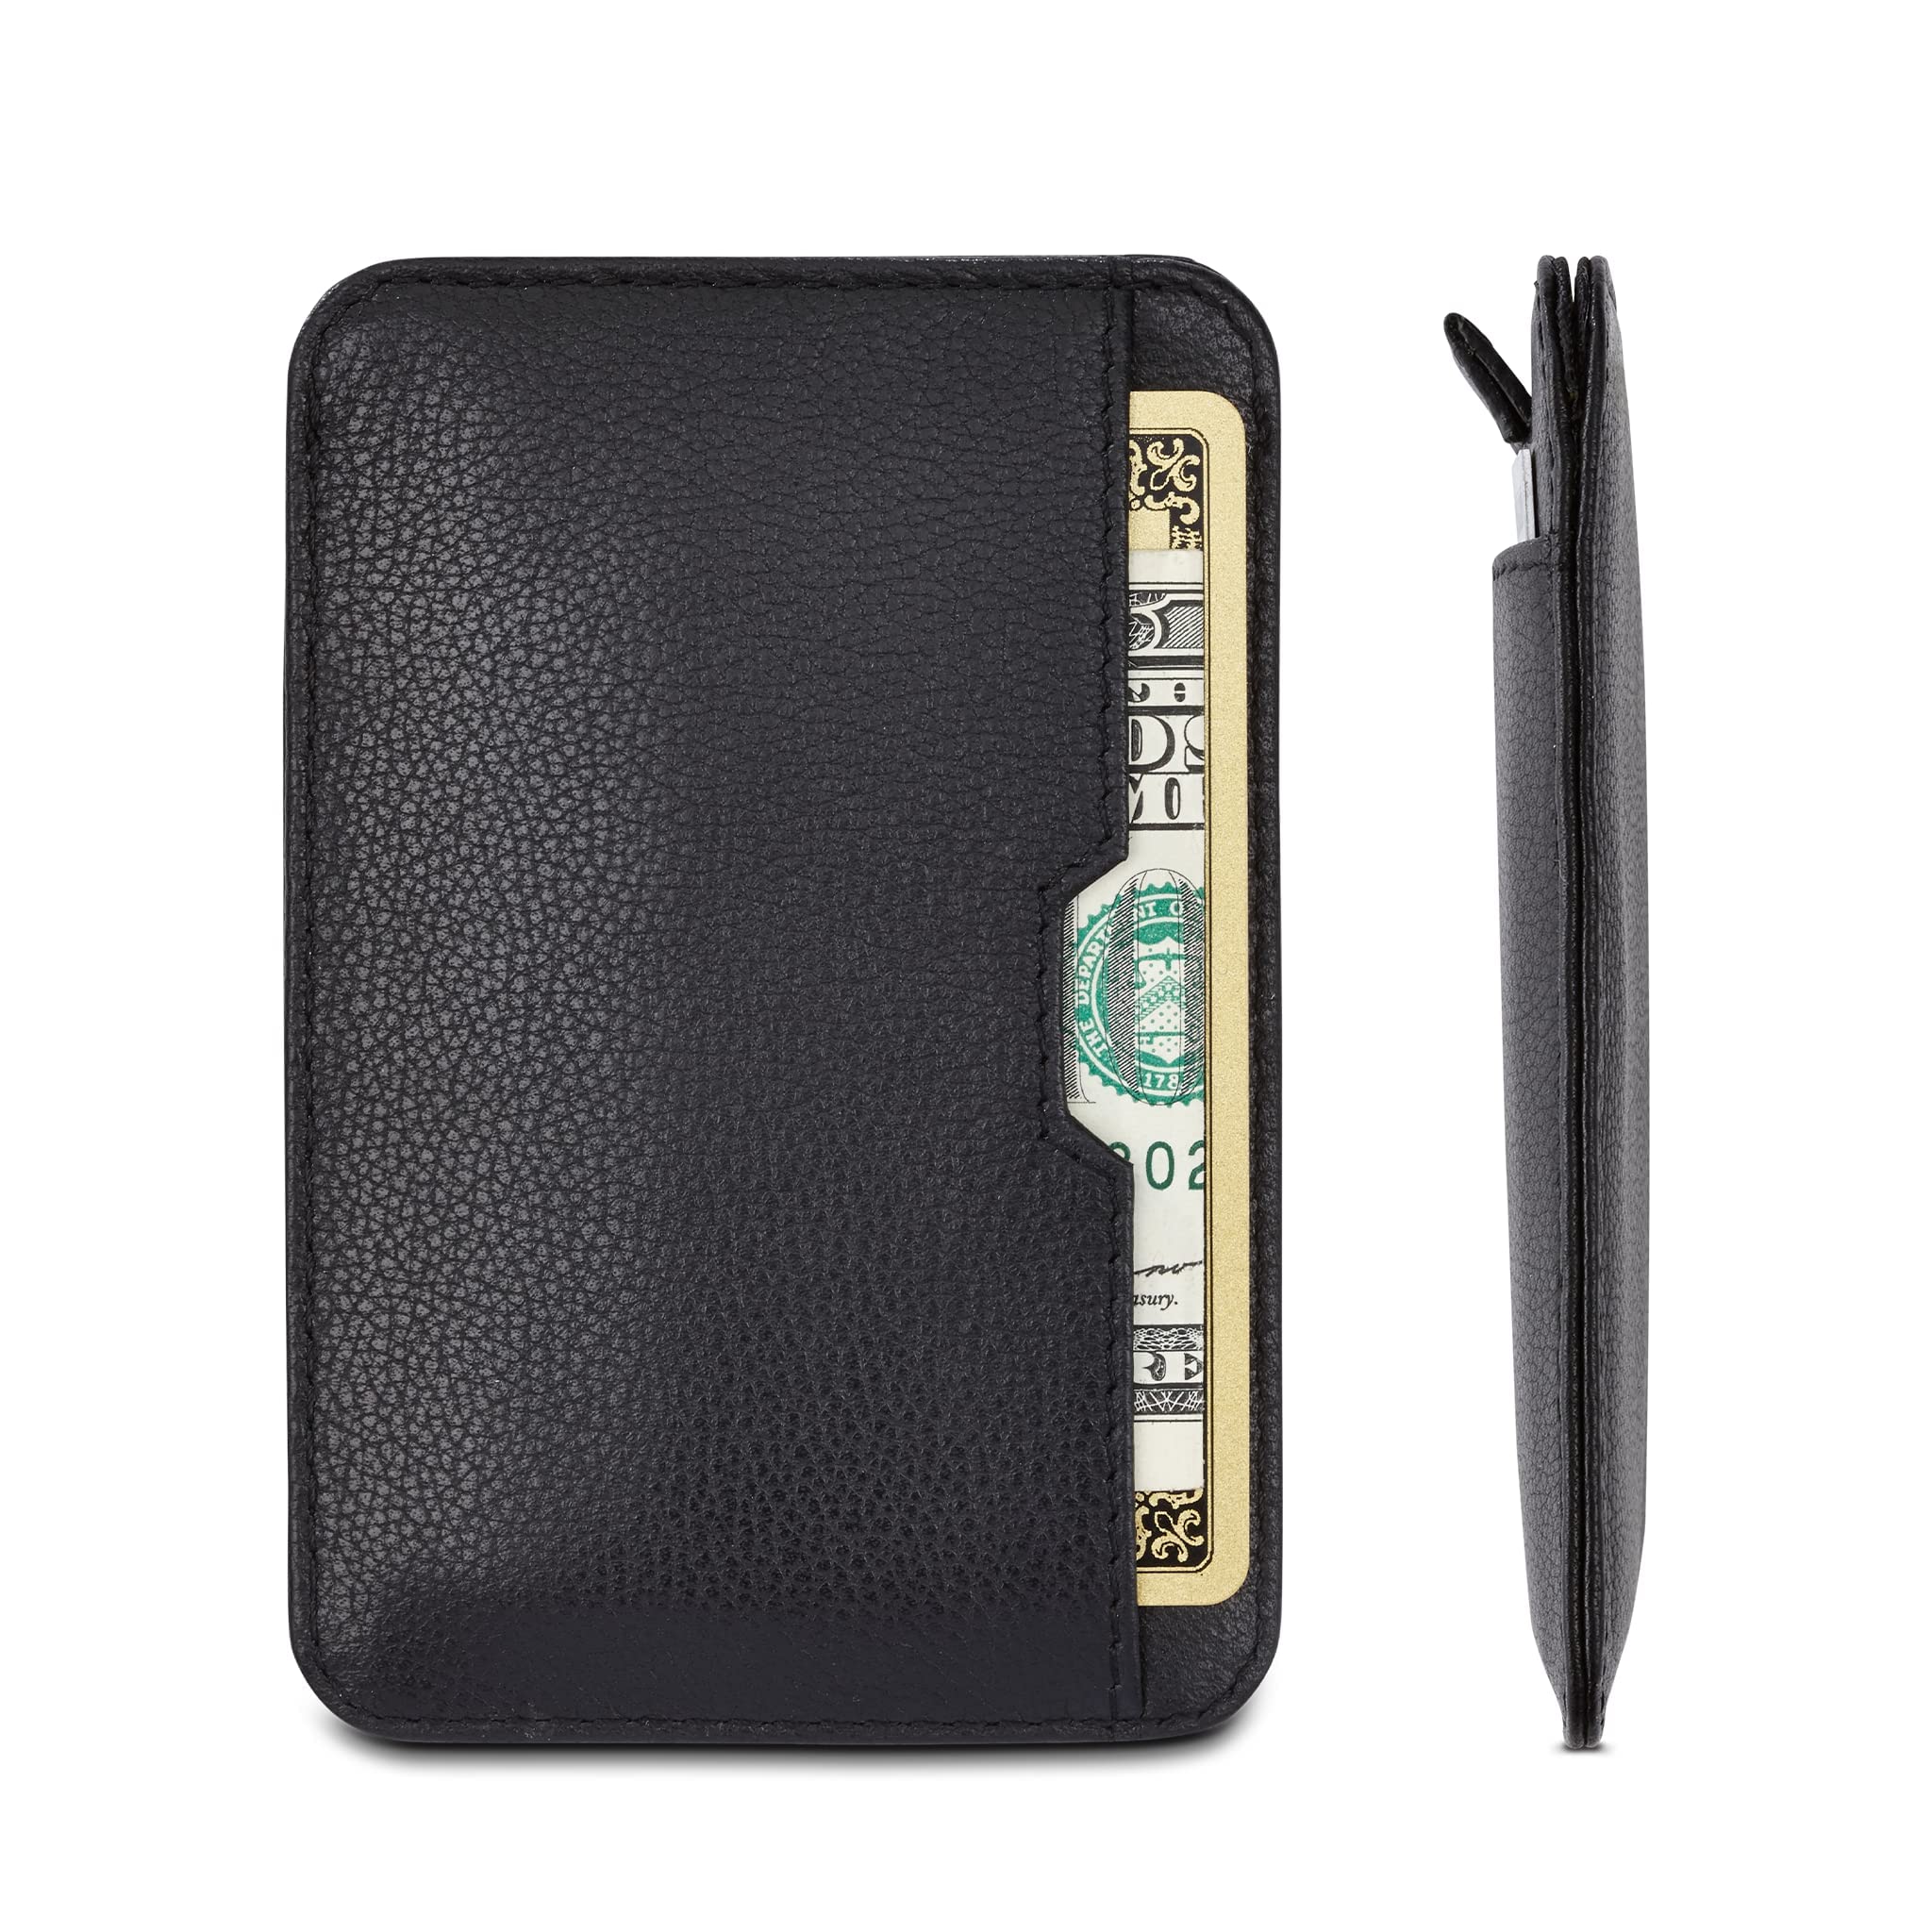 Vaultskin CHELSEA Slim Minimalist Front Pocket Leather Wallet with RFID Blocking for Men with Gift Box